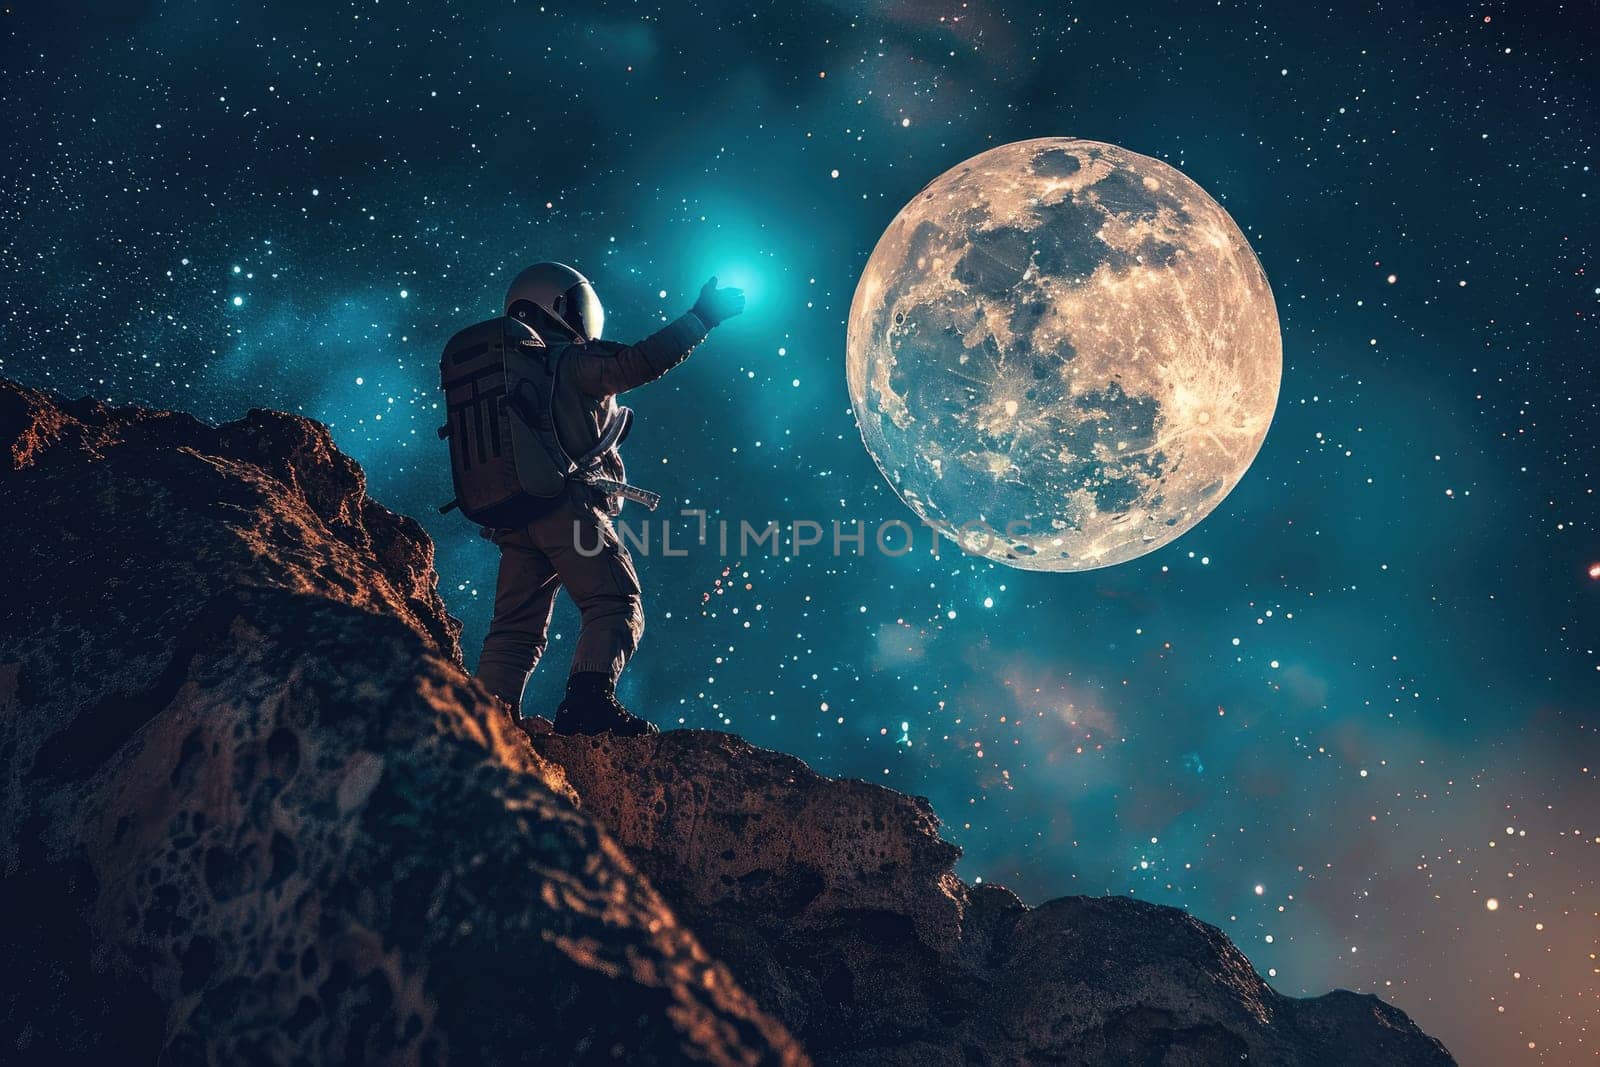 Space suit, standing on top of a mountain, reaching out to touch the full moon by Chawagen